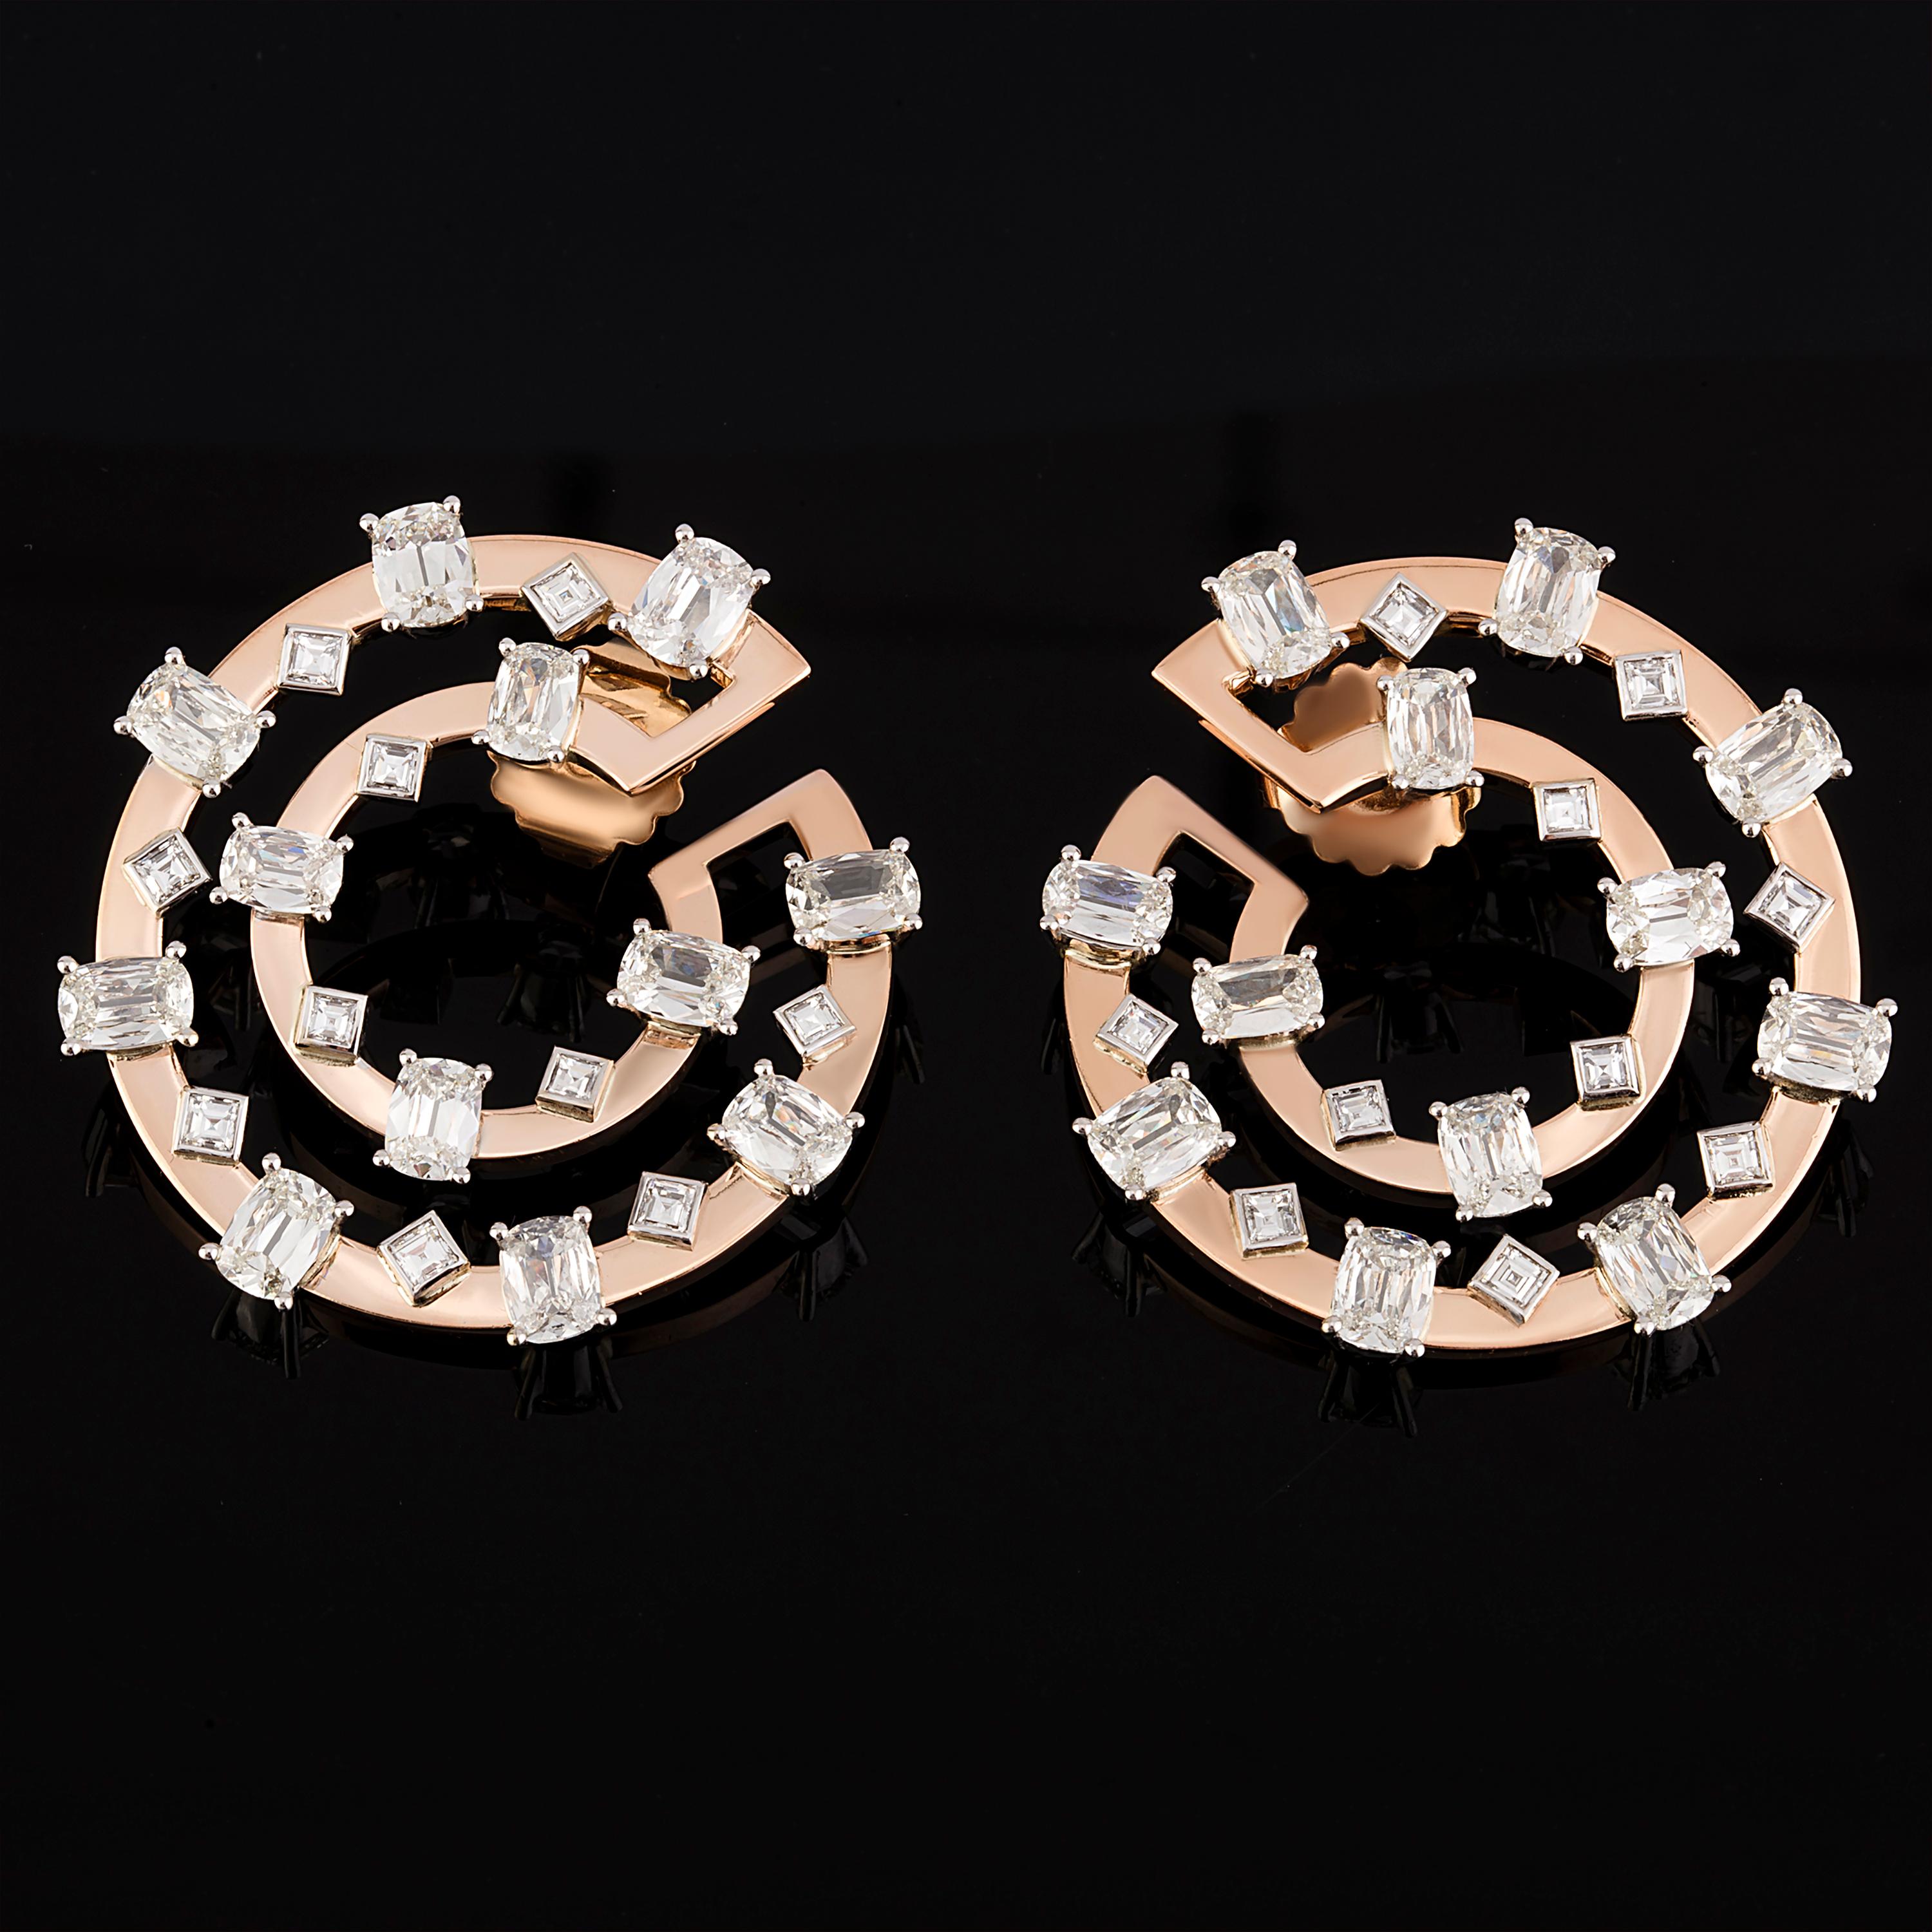 This Beautiful Natural Diamond Earring is Hand Crafted in 18 Karat Rose Gold with Total 10.54 Carat Natural Diamonds.
It has 9.43 Carats of I - J color / VVS-VS Quality Oldcut Cushion Diamonds,  1.11 Carat F/G color / VVS - VS Quality Square Carre